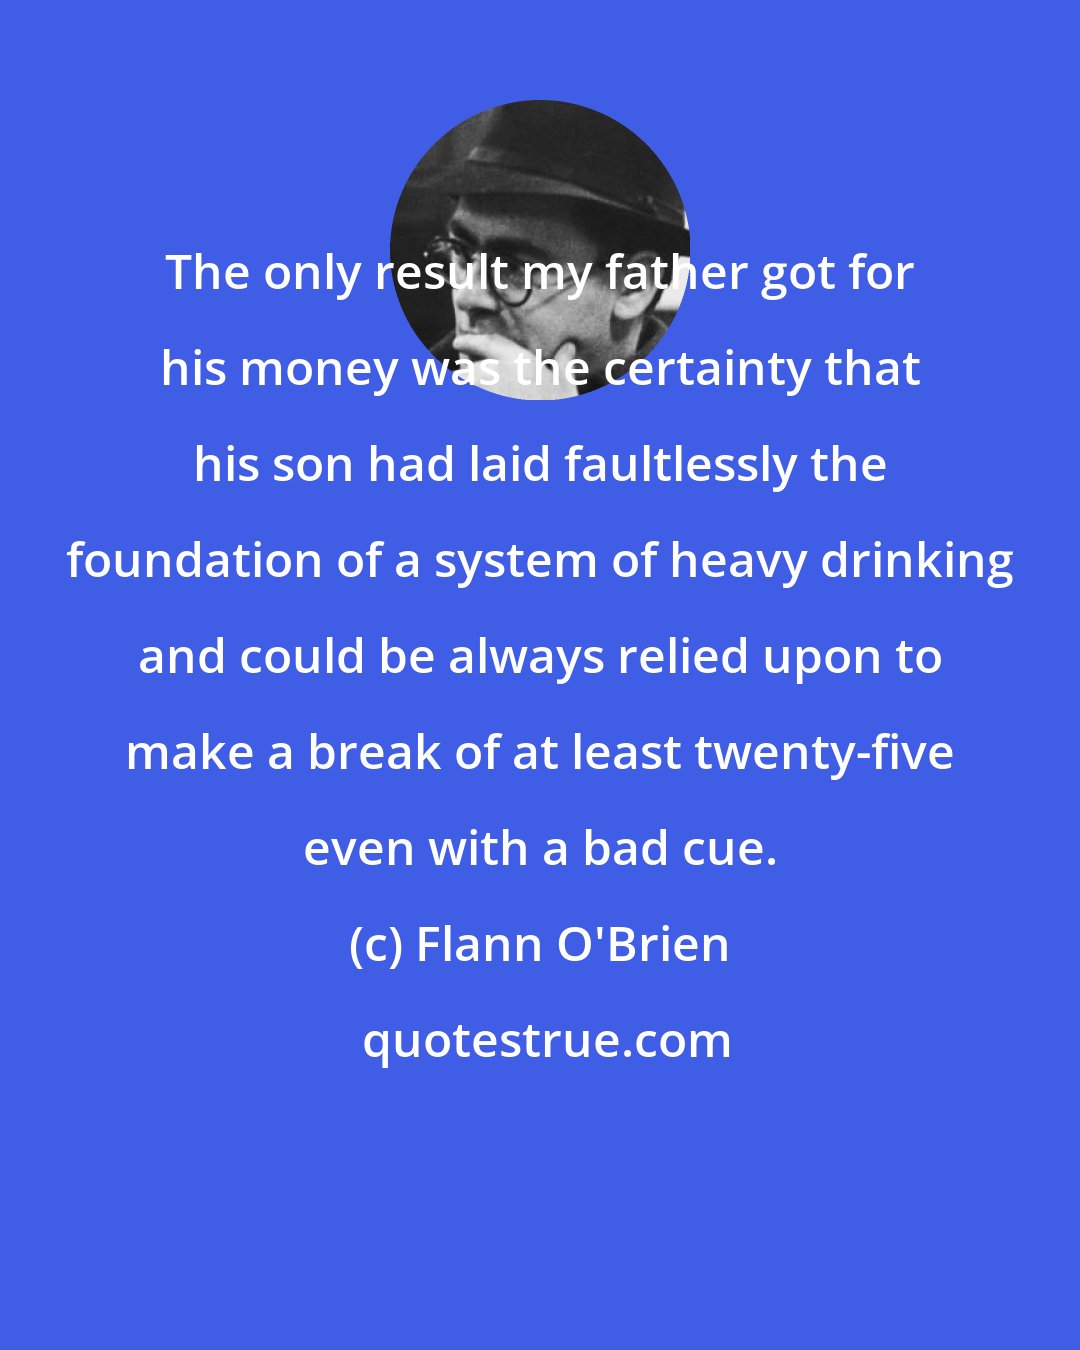 Flann O'Brien: The only result my father got for his money was the certainty that his son had laid faultlessly the foundation of a system of heavy drinking and could be always relied upon to make a break of at least twenty-five even with a bad cue.